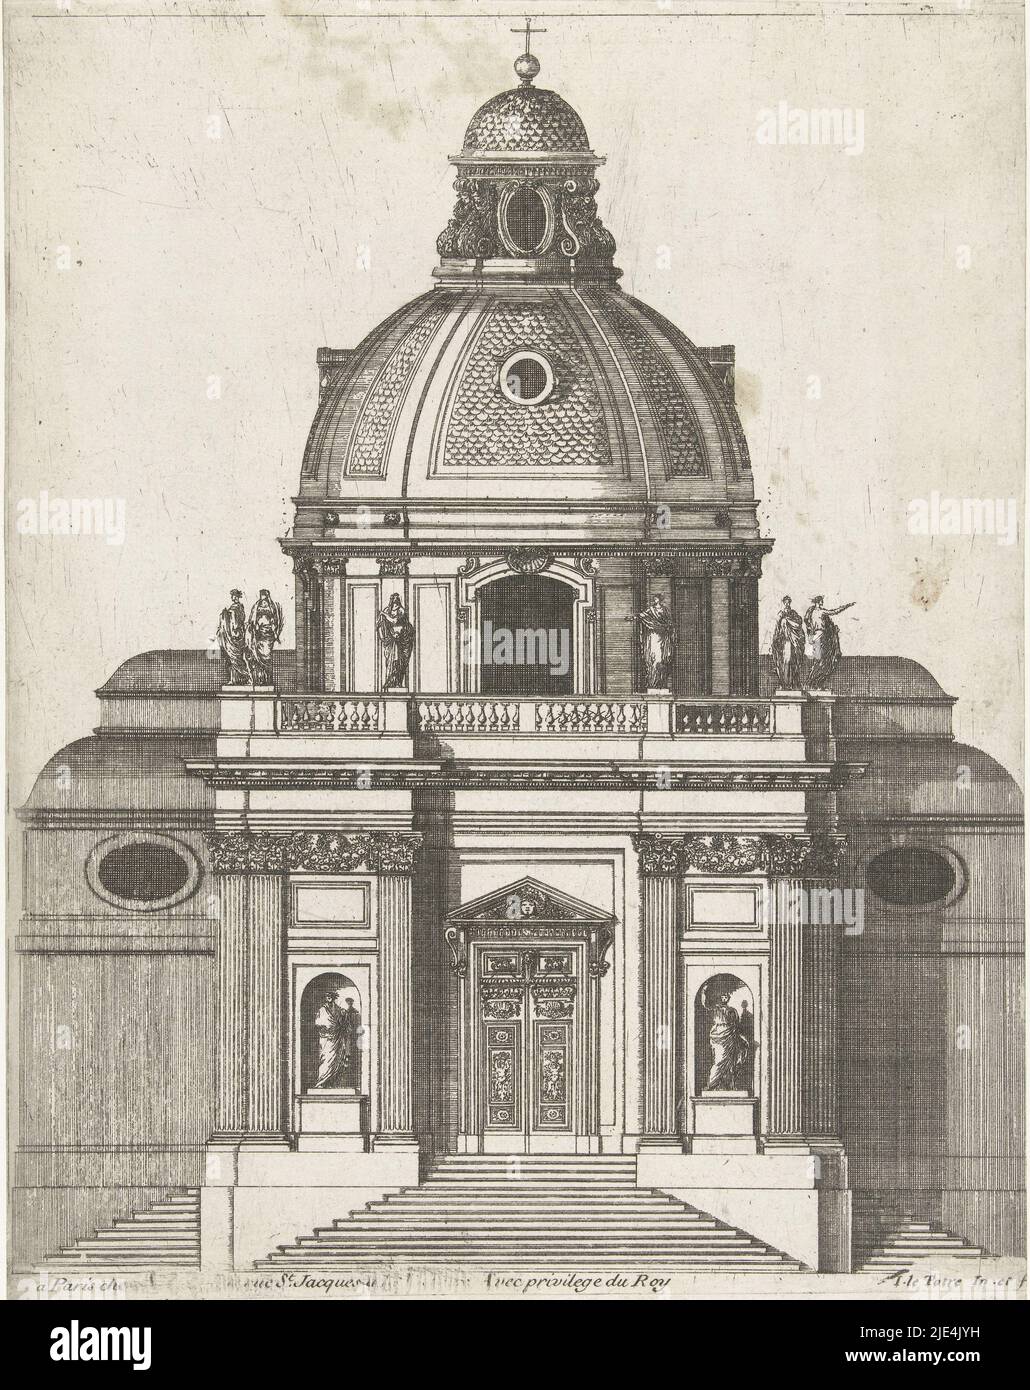 Portico of church with dome, Jean Lepautre, c. 1670 - c. 1680, print maker: Jean Lepautre, (mentioned on object), Jean Lepautre, (mentioned on object), publisher: Nicolas Langlois (I), (mentioned on object), print maker: France, (possibly), France, (possibly), publisher: Paris, c. 1670 - c. 1680, paper, etching, h 244 mm, w 191 mm Stock Photo